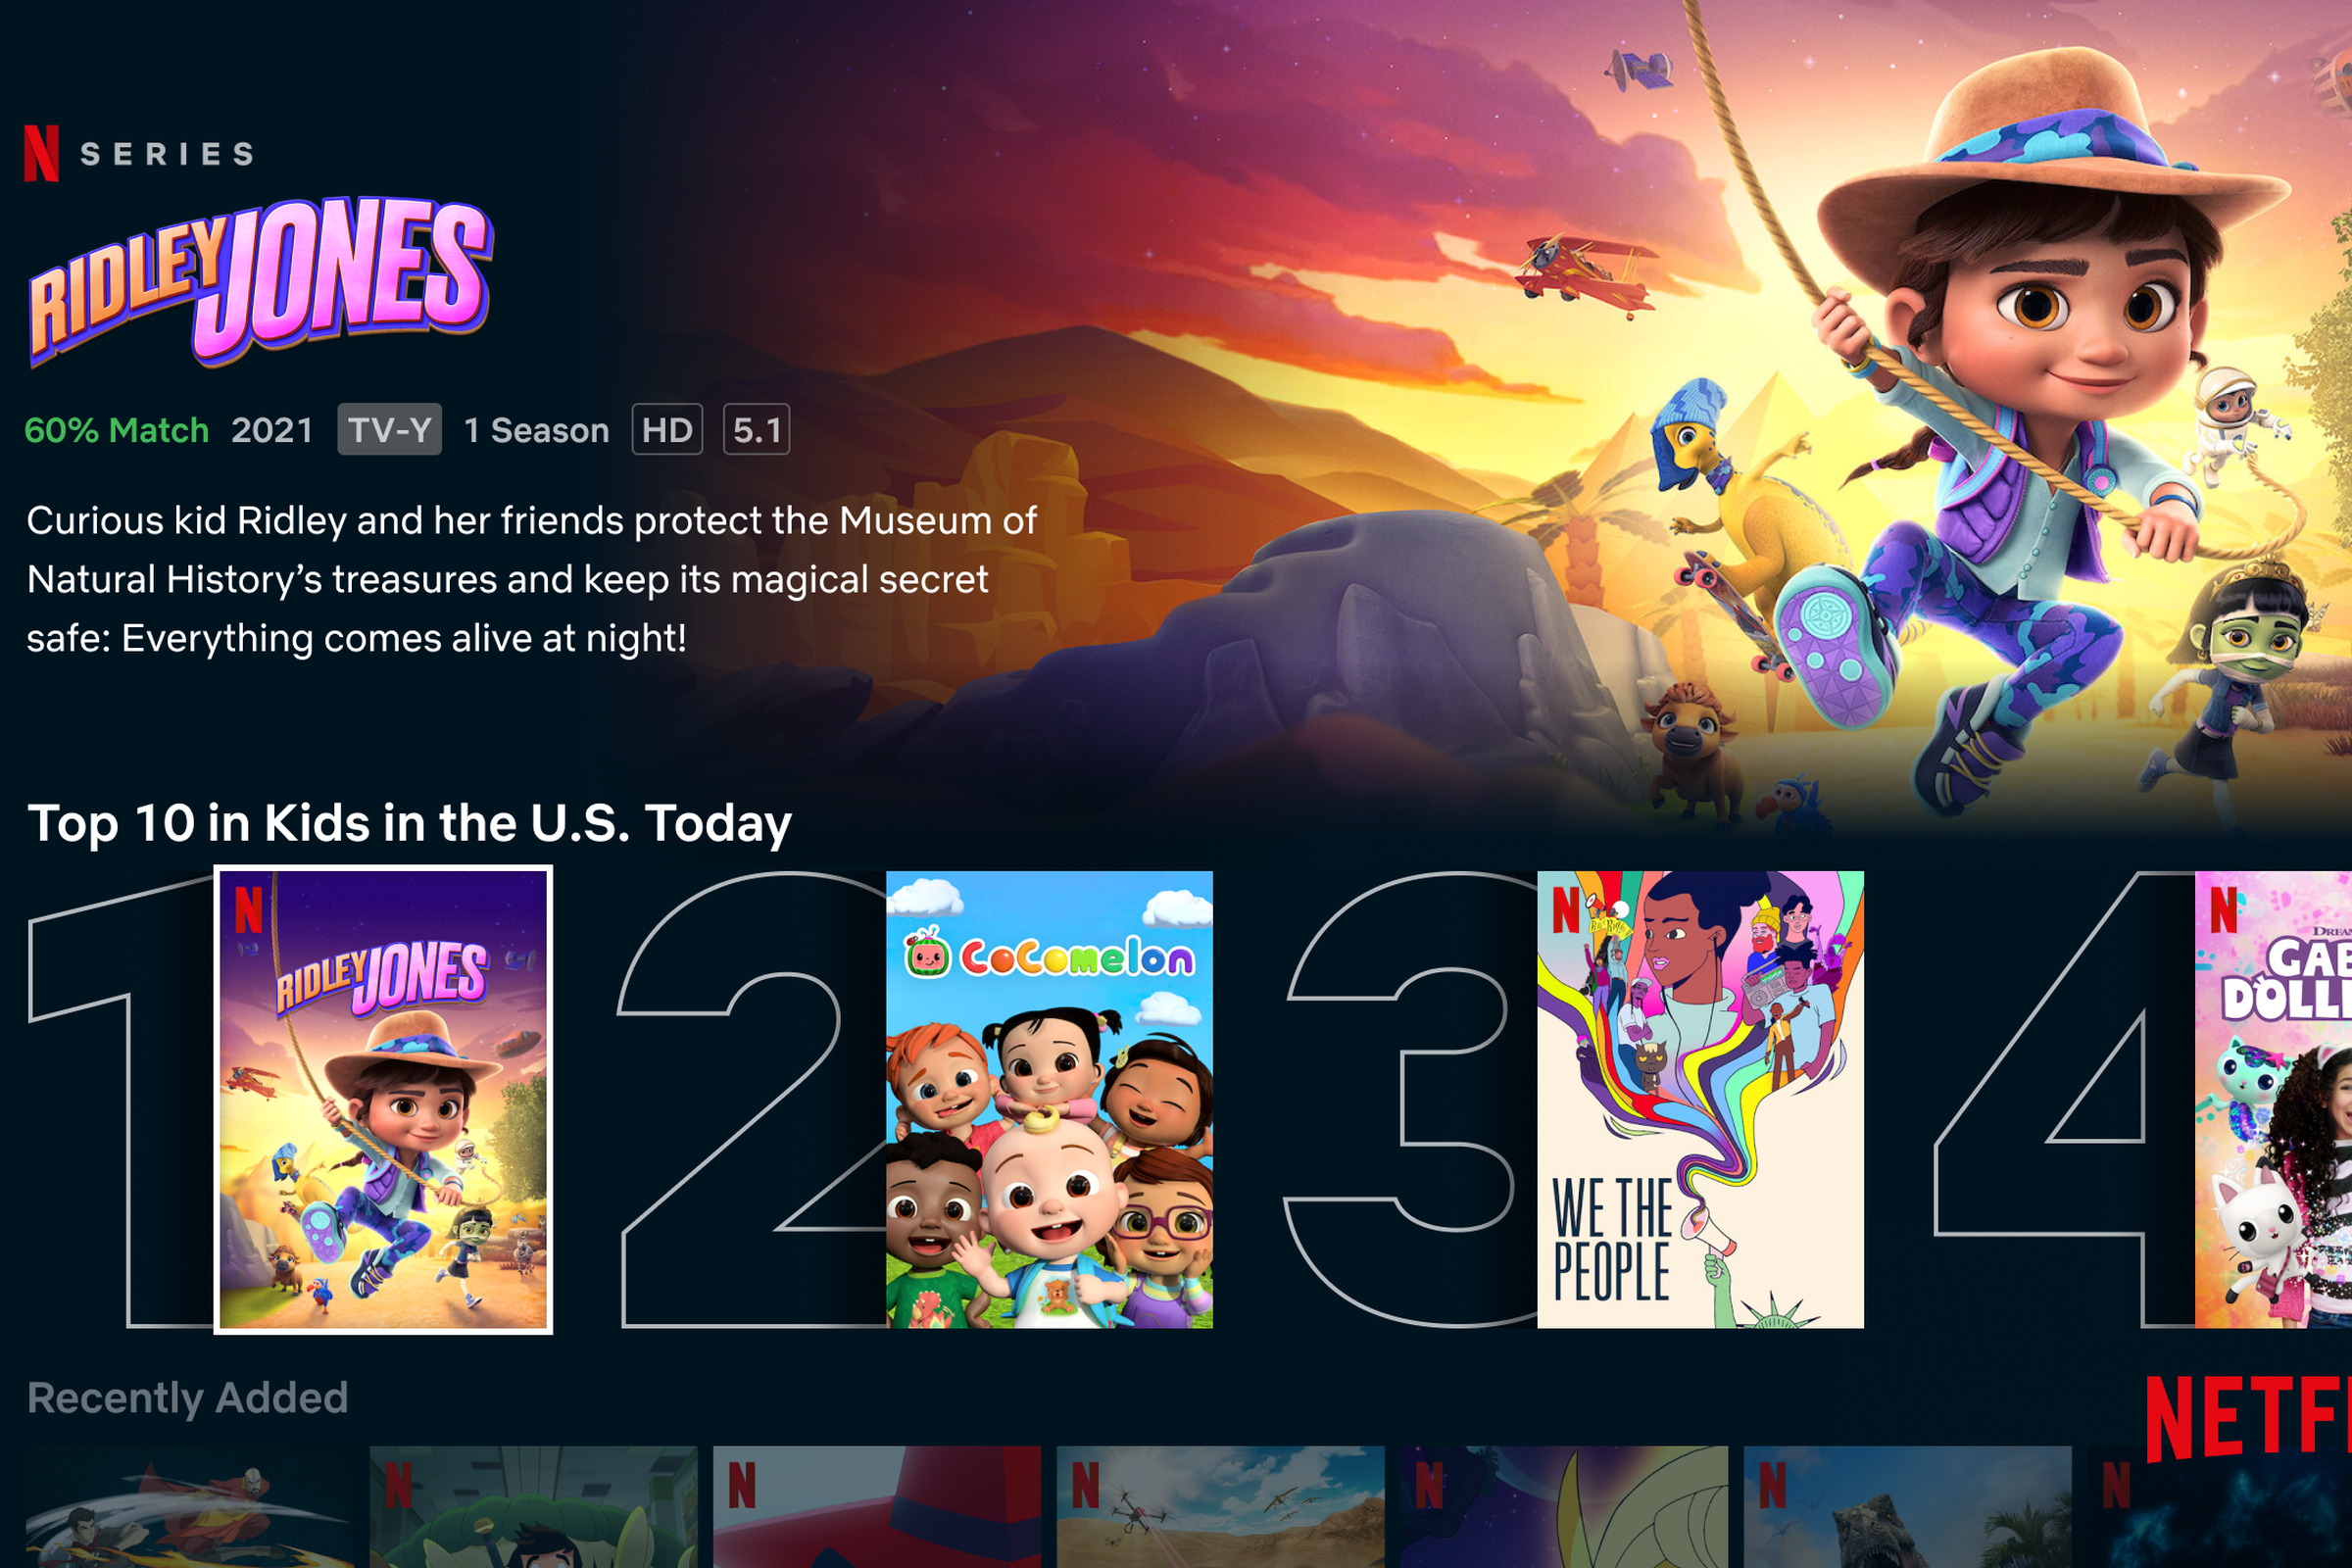 Netflix Kids will now have its own top 10 row.